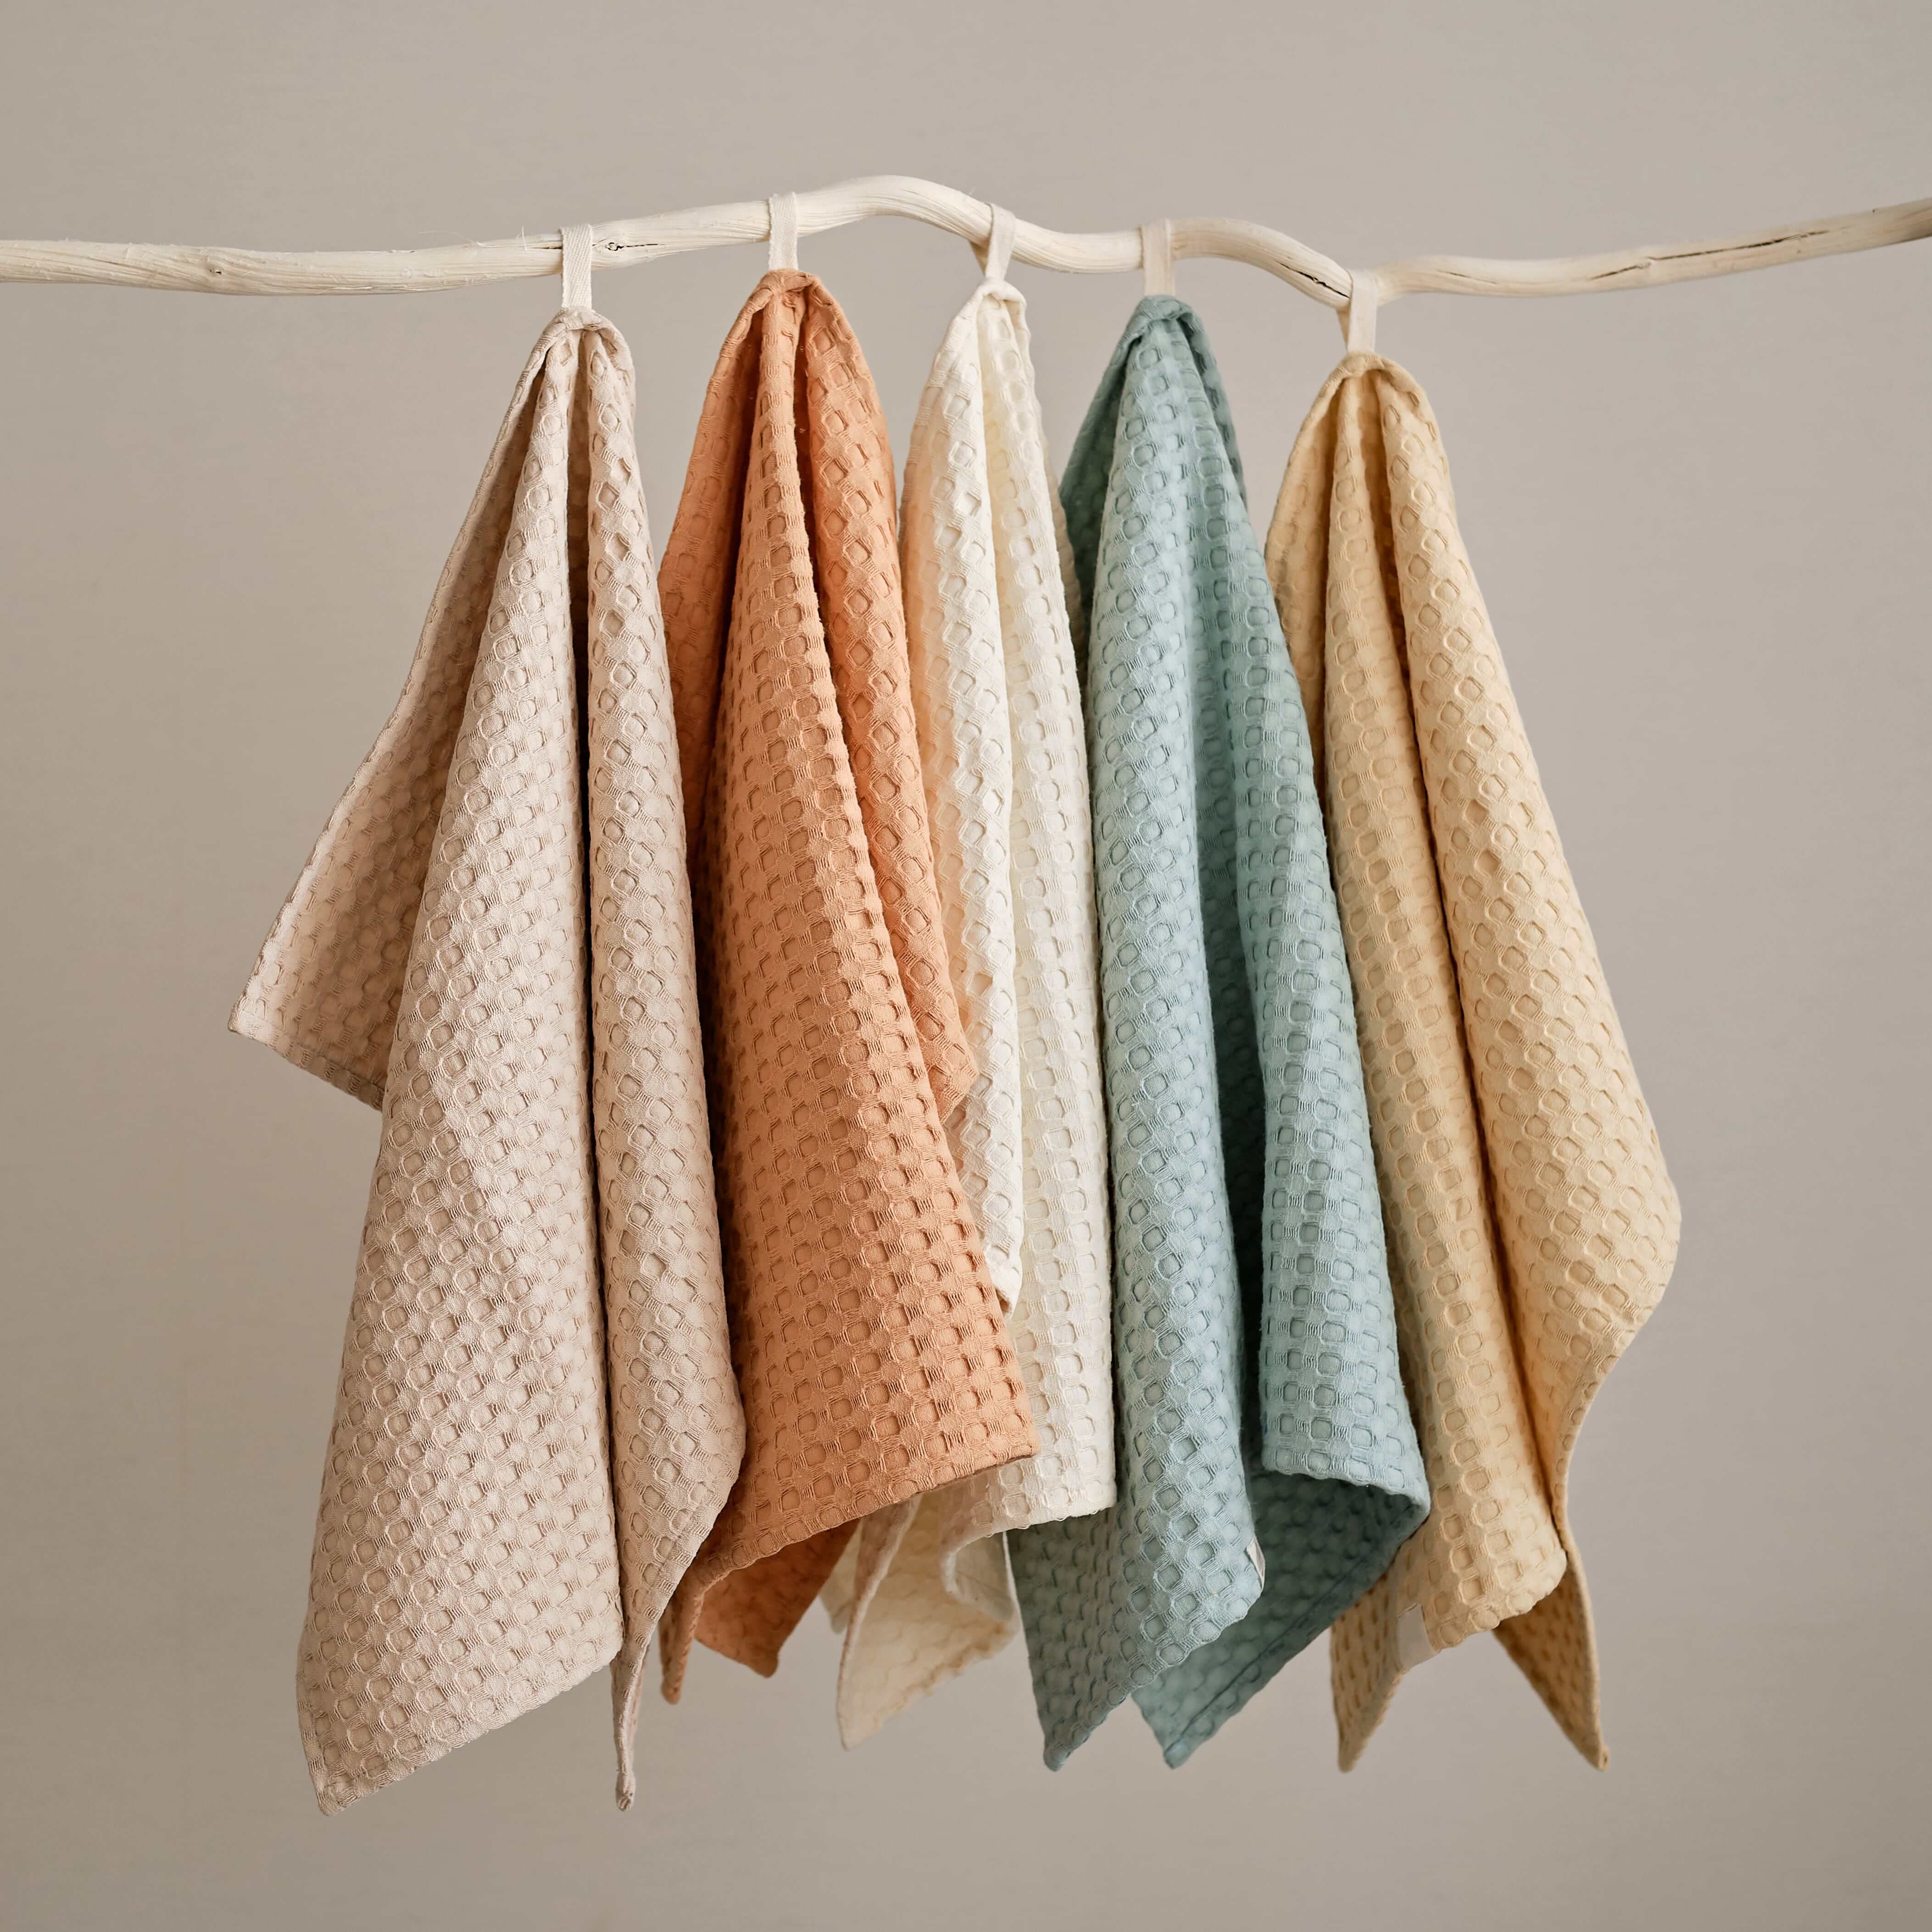 7 tips on how to properly care and maintain for your towels